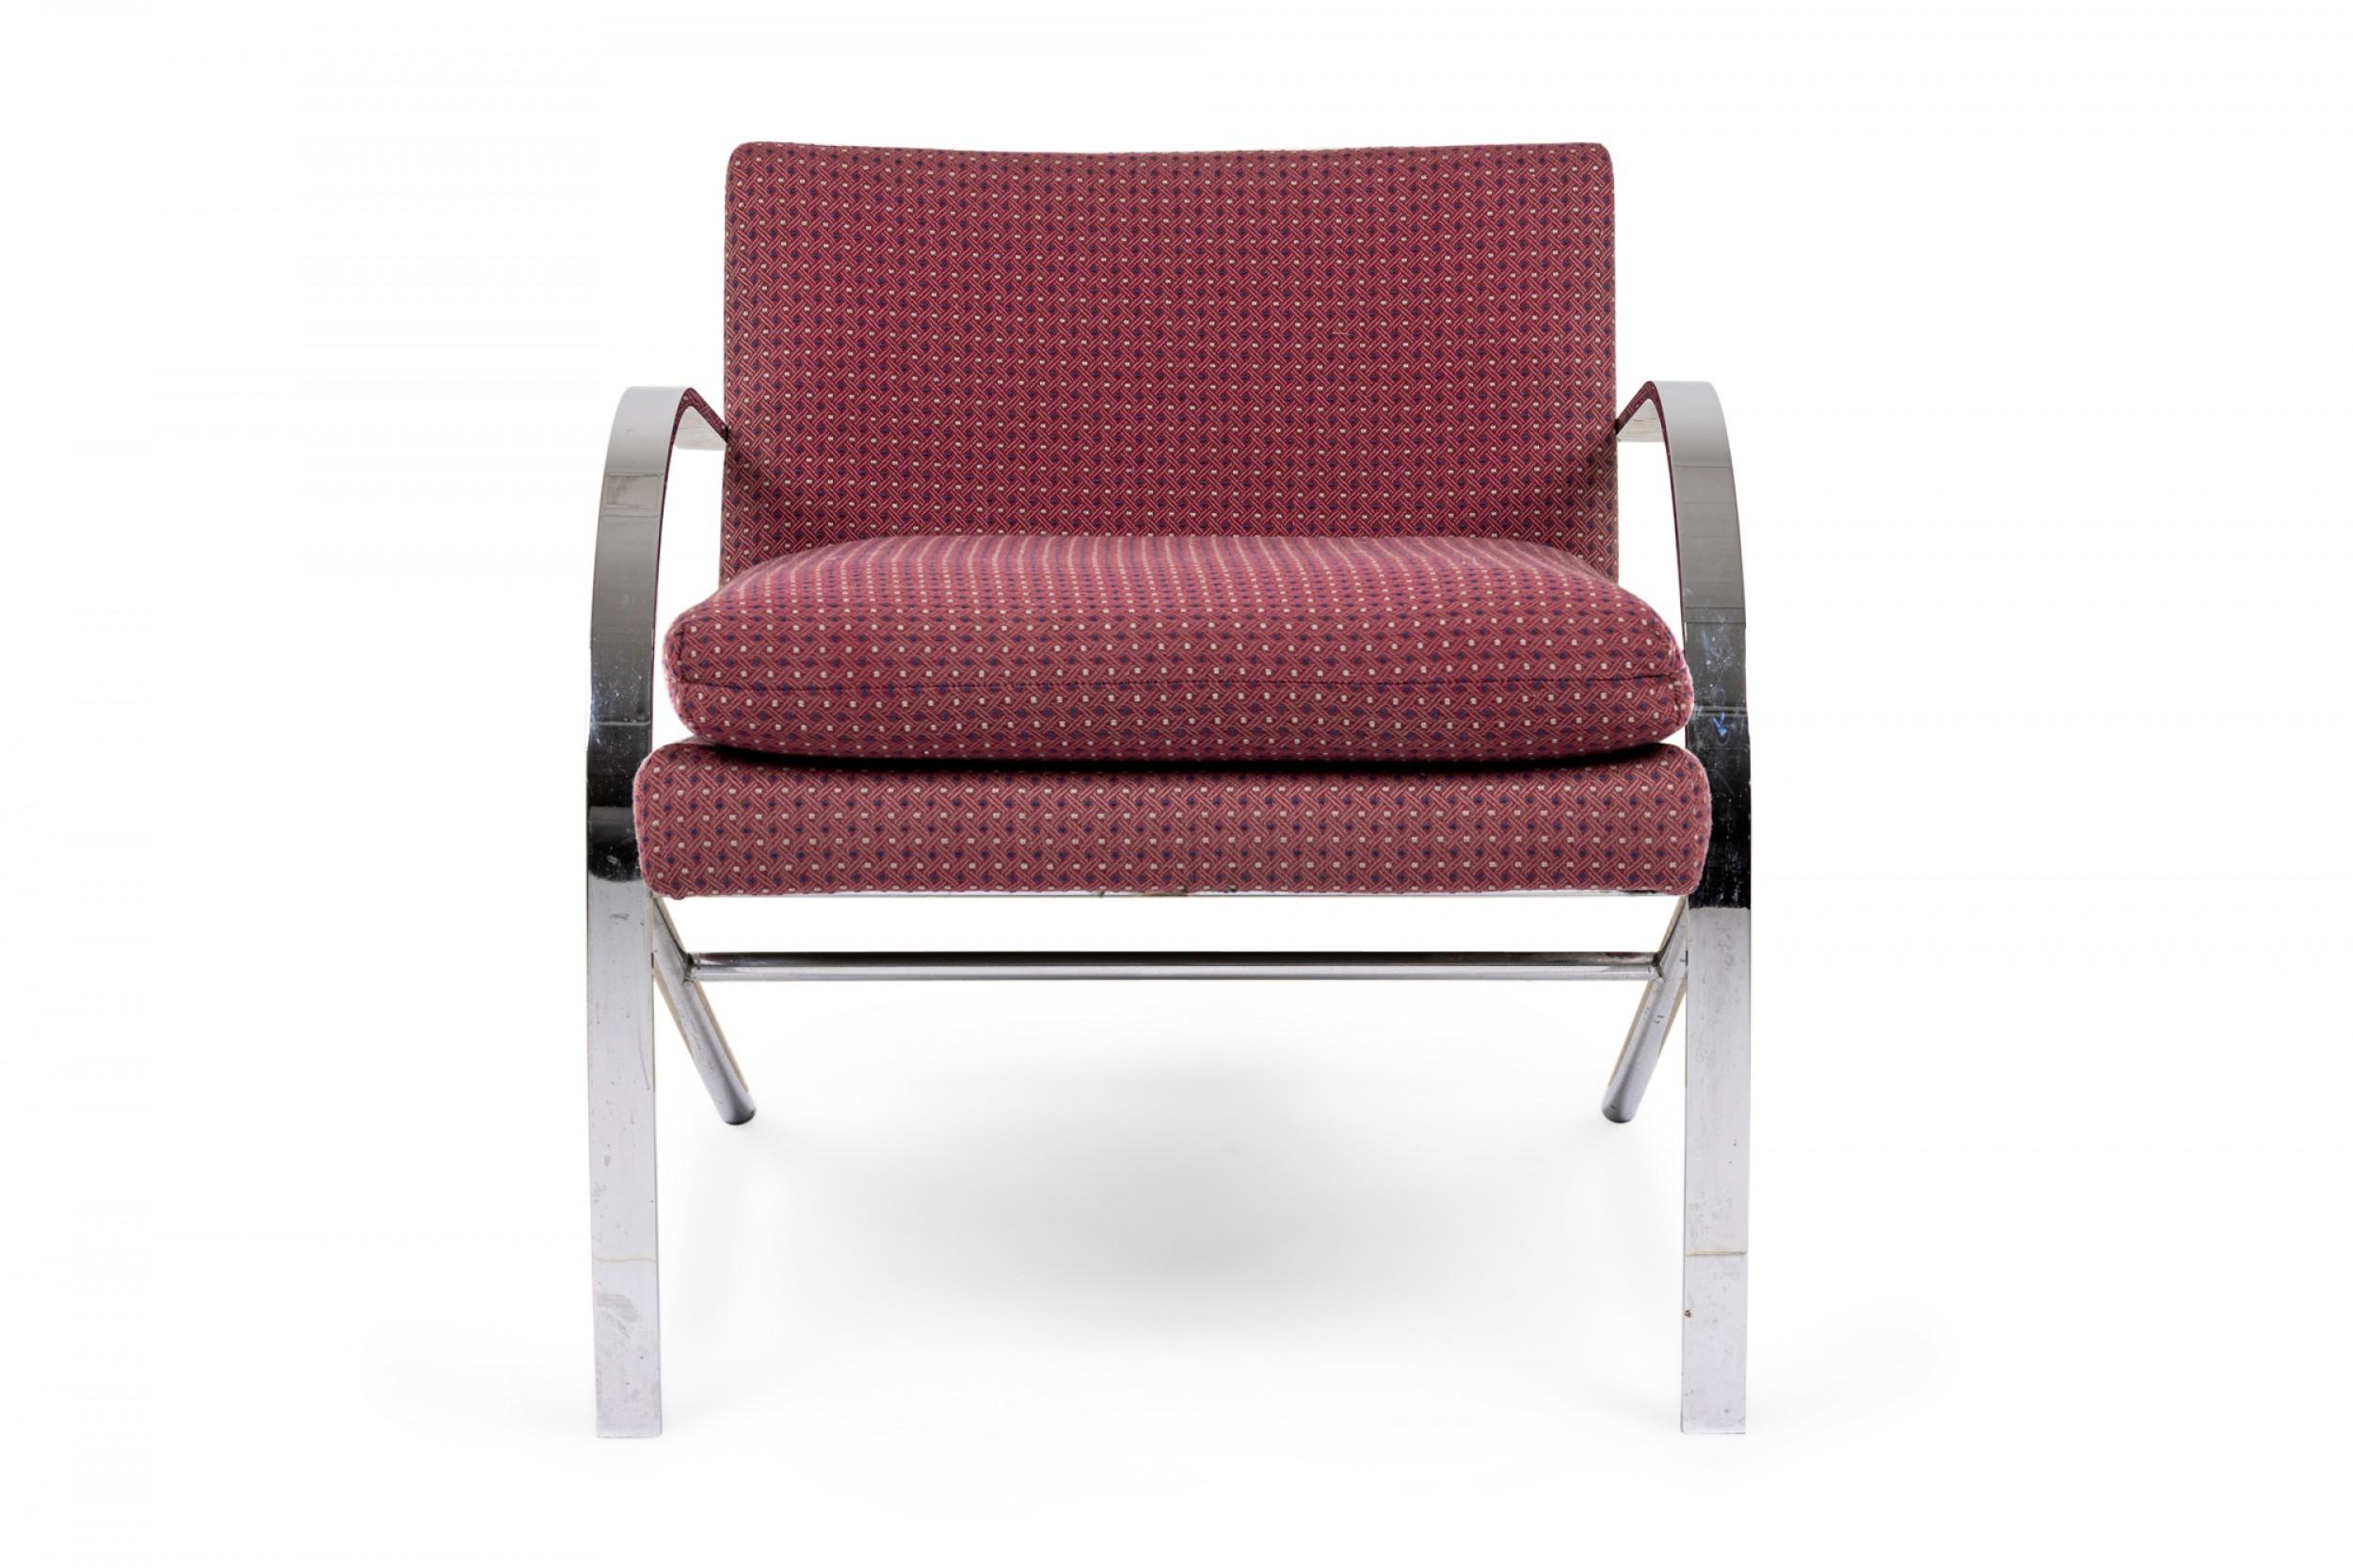 American Mid-Century 'Arco' form lounge / armchair with muted red upholstery with a geometric navy blue and beige dot pattern and removable seat cushion, supported by a chrome frame comprised of two arching beams that create both the arms and front